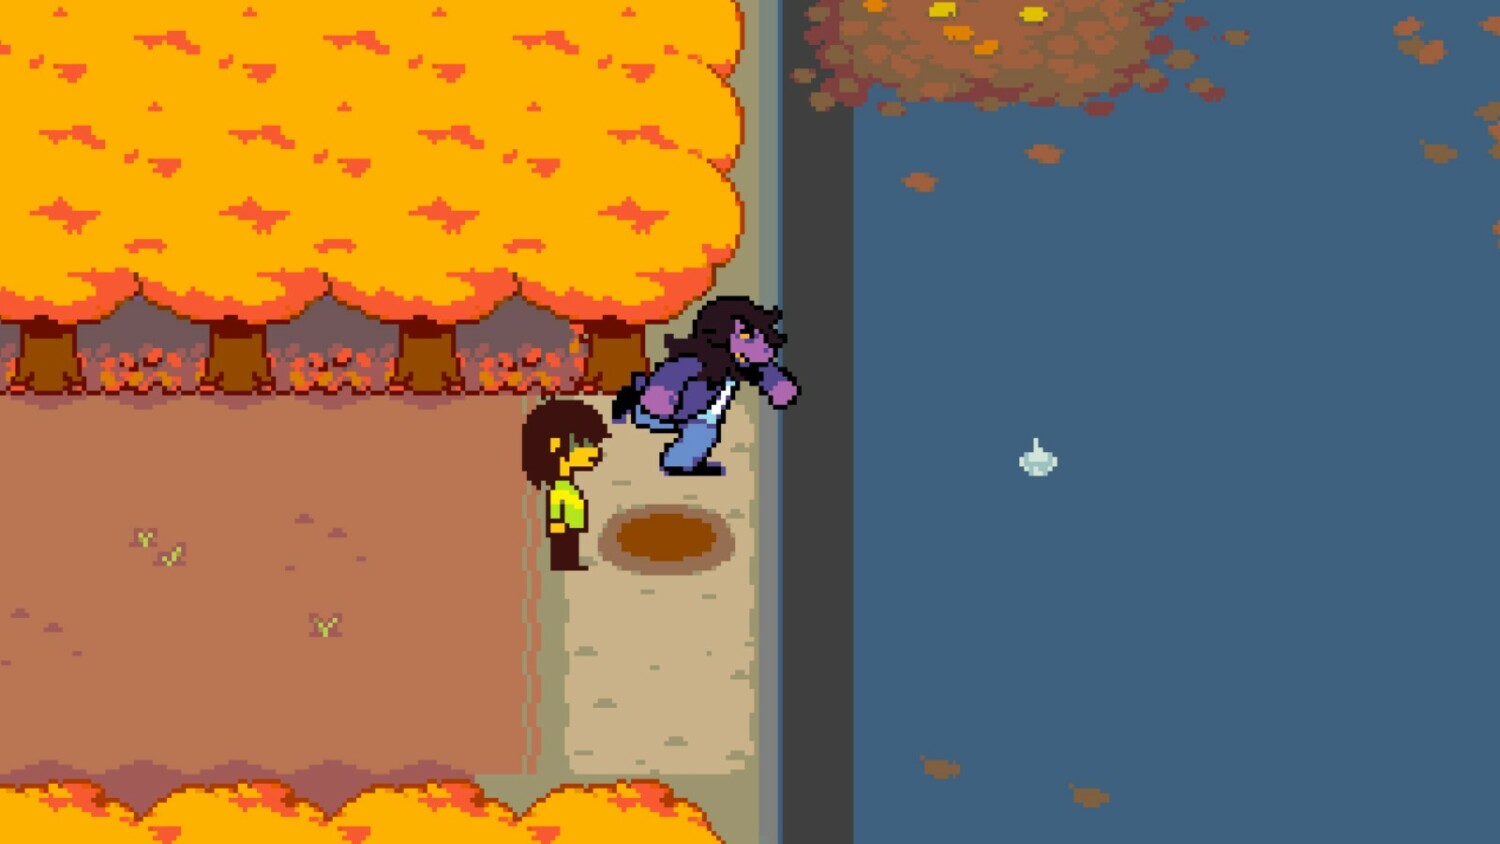 Deltarune Chapter 3 is 'pretty much content complete' and will be releasing  alongside Chapter 4, says creator Toby Fox